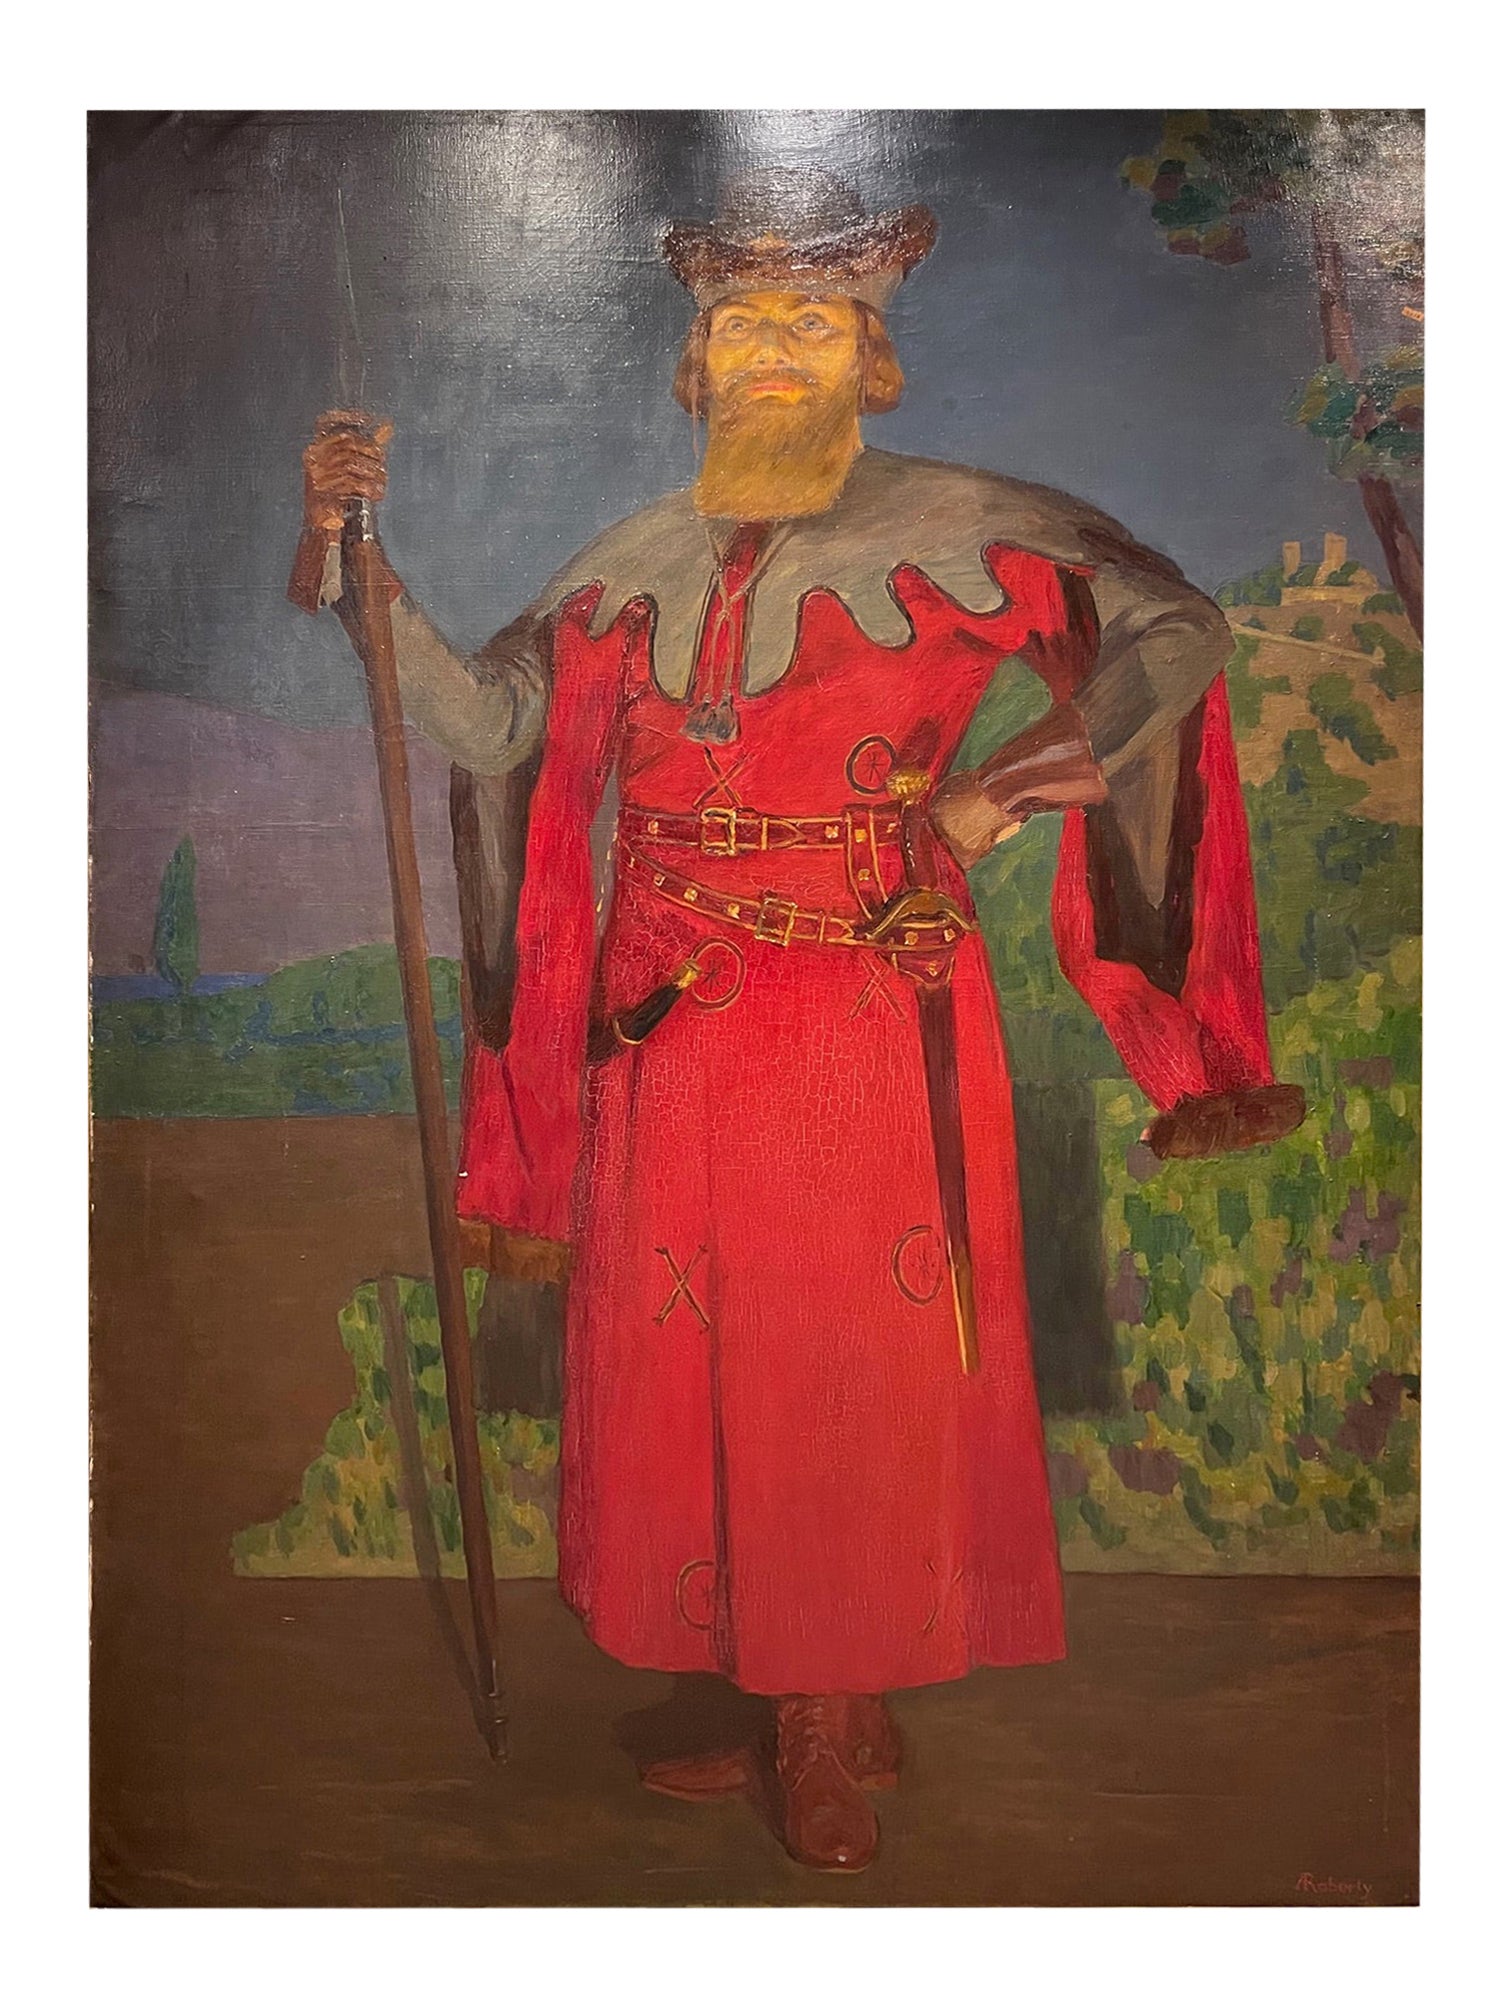 Very large painting portraying an actor? AF. ROBERTY (1877-1963), circa 1940